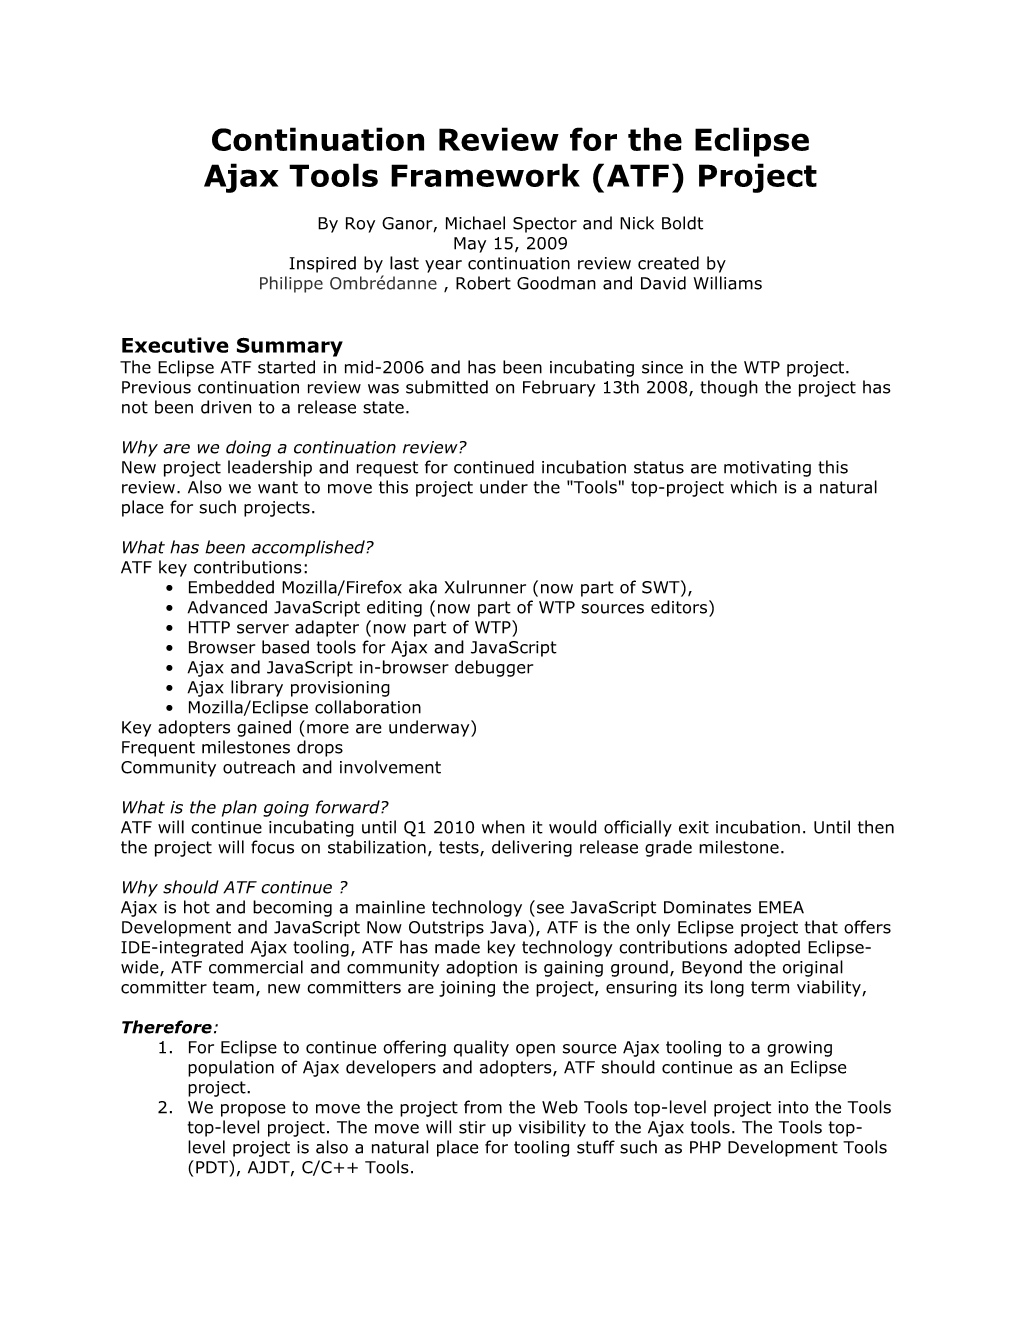 Continuation Review for the Eclipse Ajax Tools Framework (ATF) Project